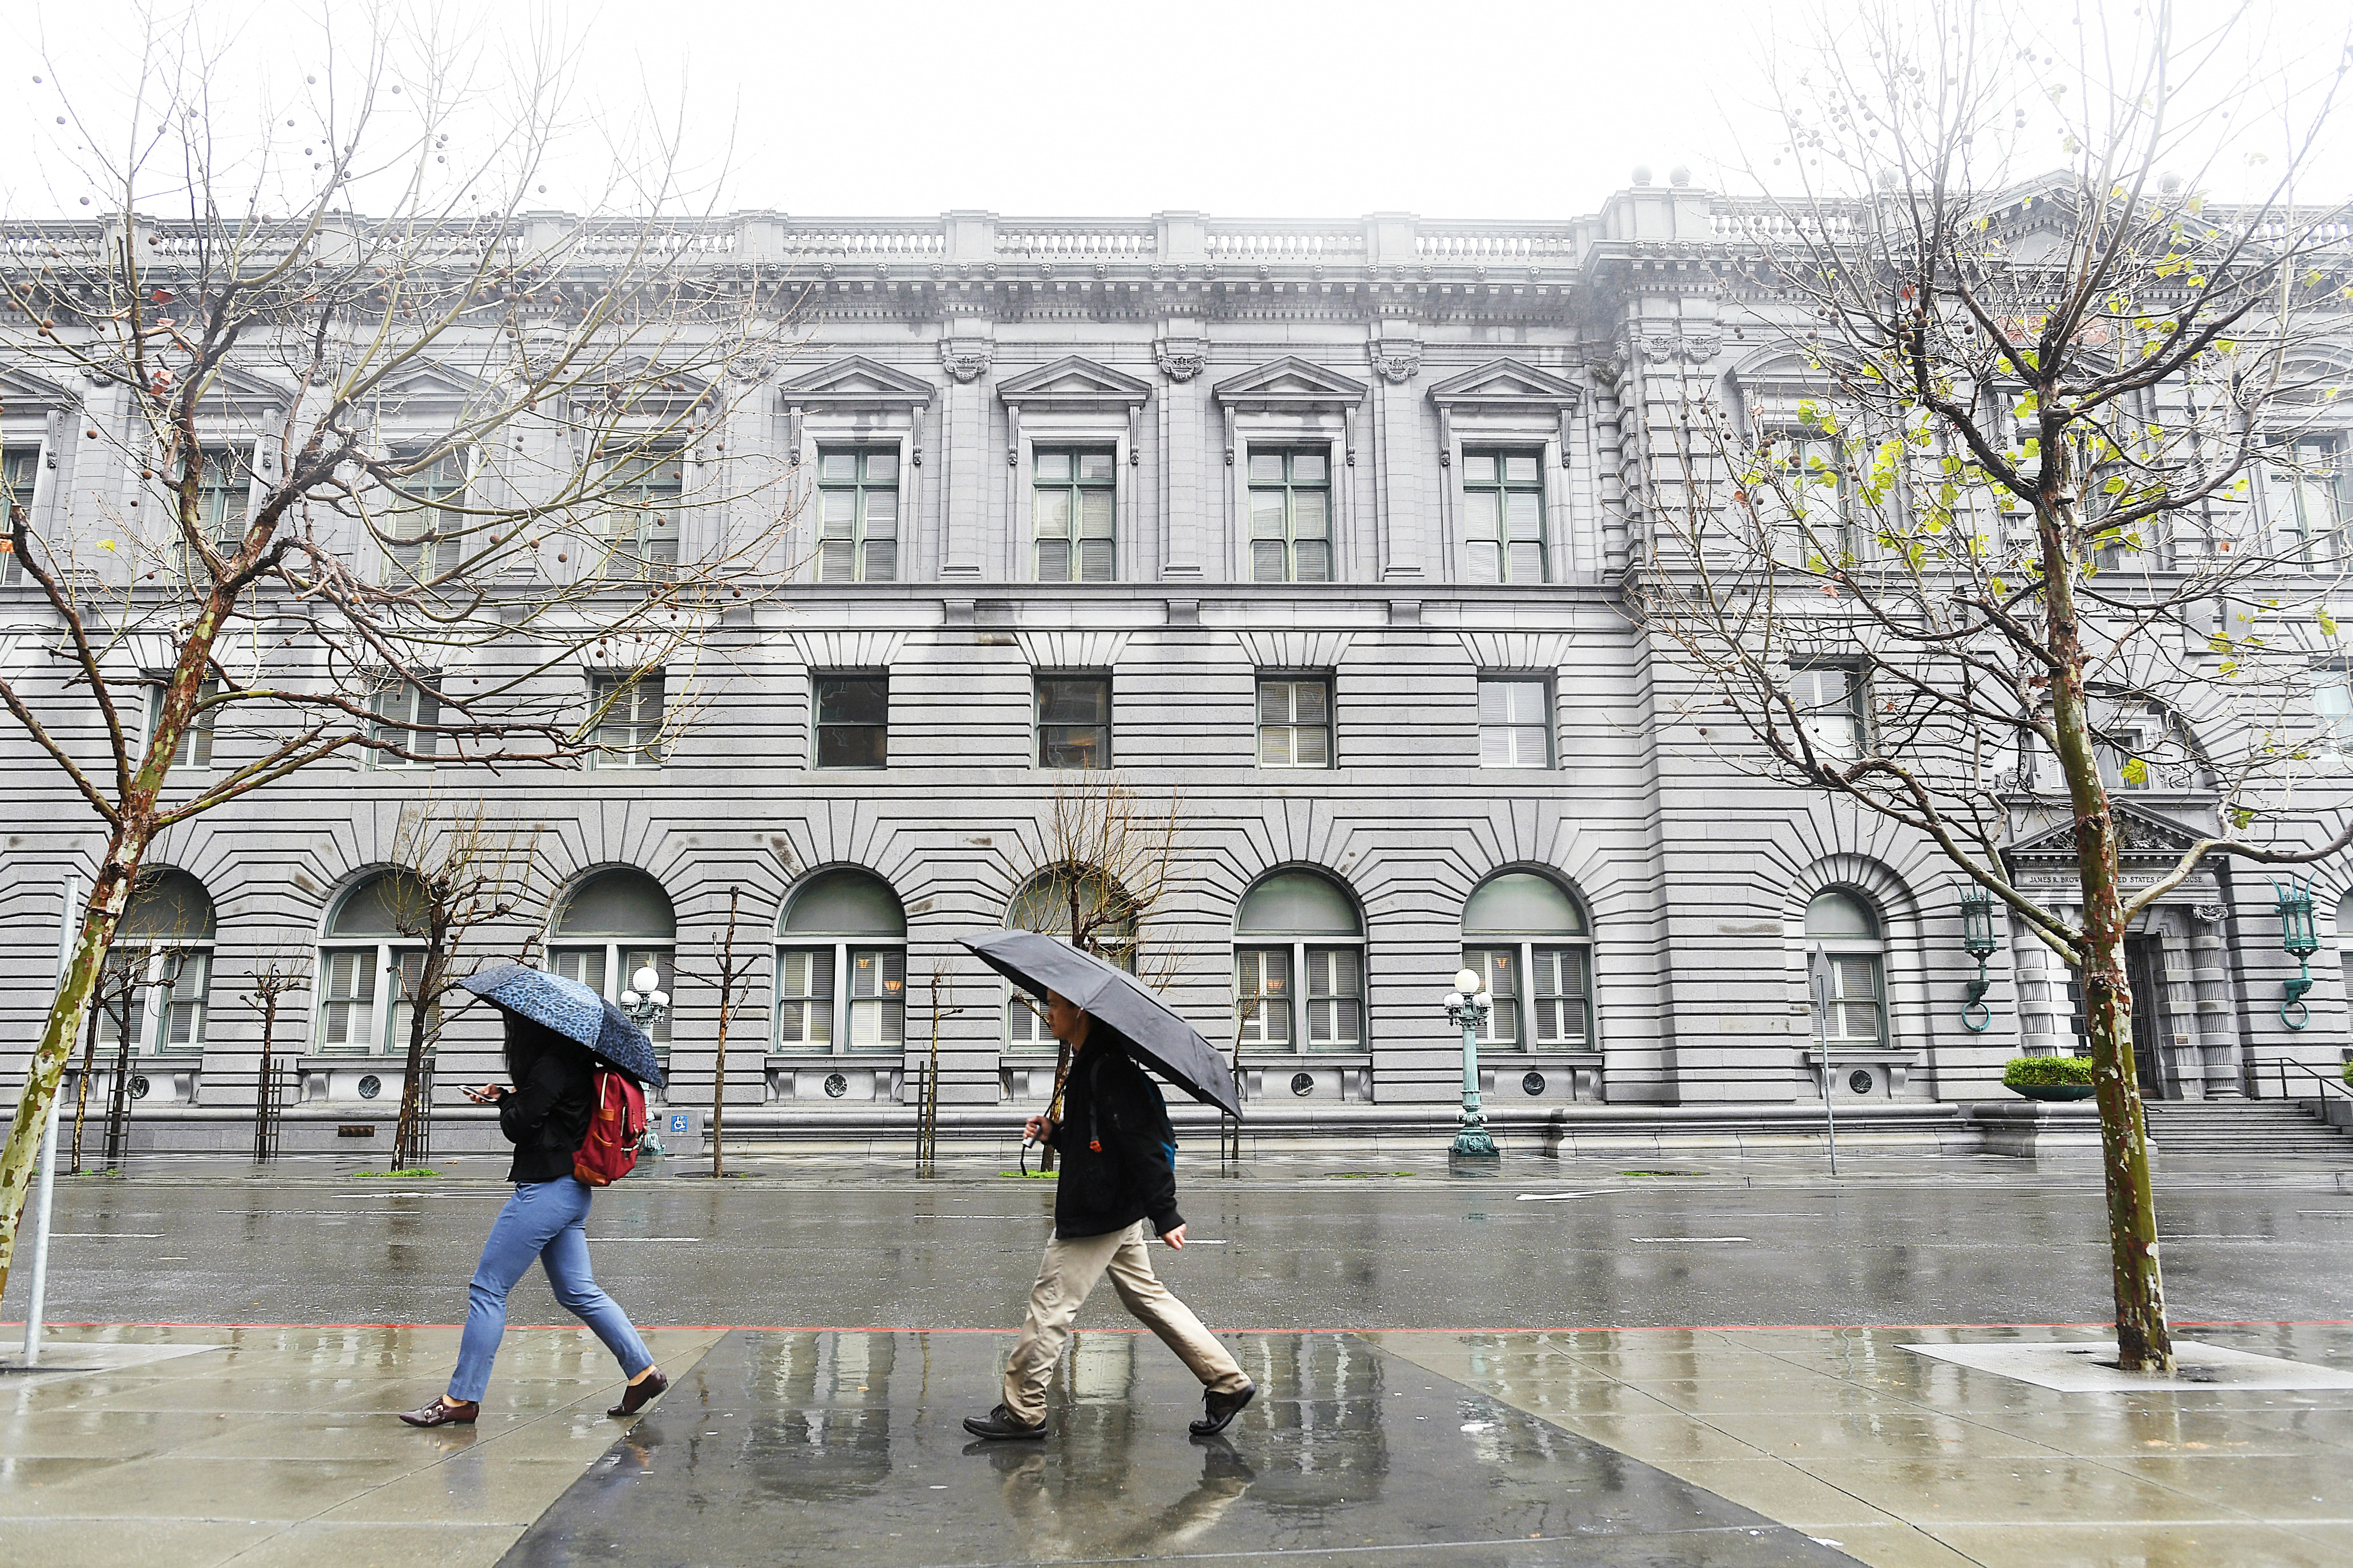 Pedestrians pass the James R. Browning U.S. Court of Appeals Building, home of the 9th U.S. Circuit Court of Appeals, in San Francisco